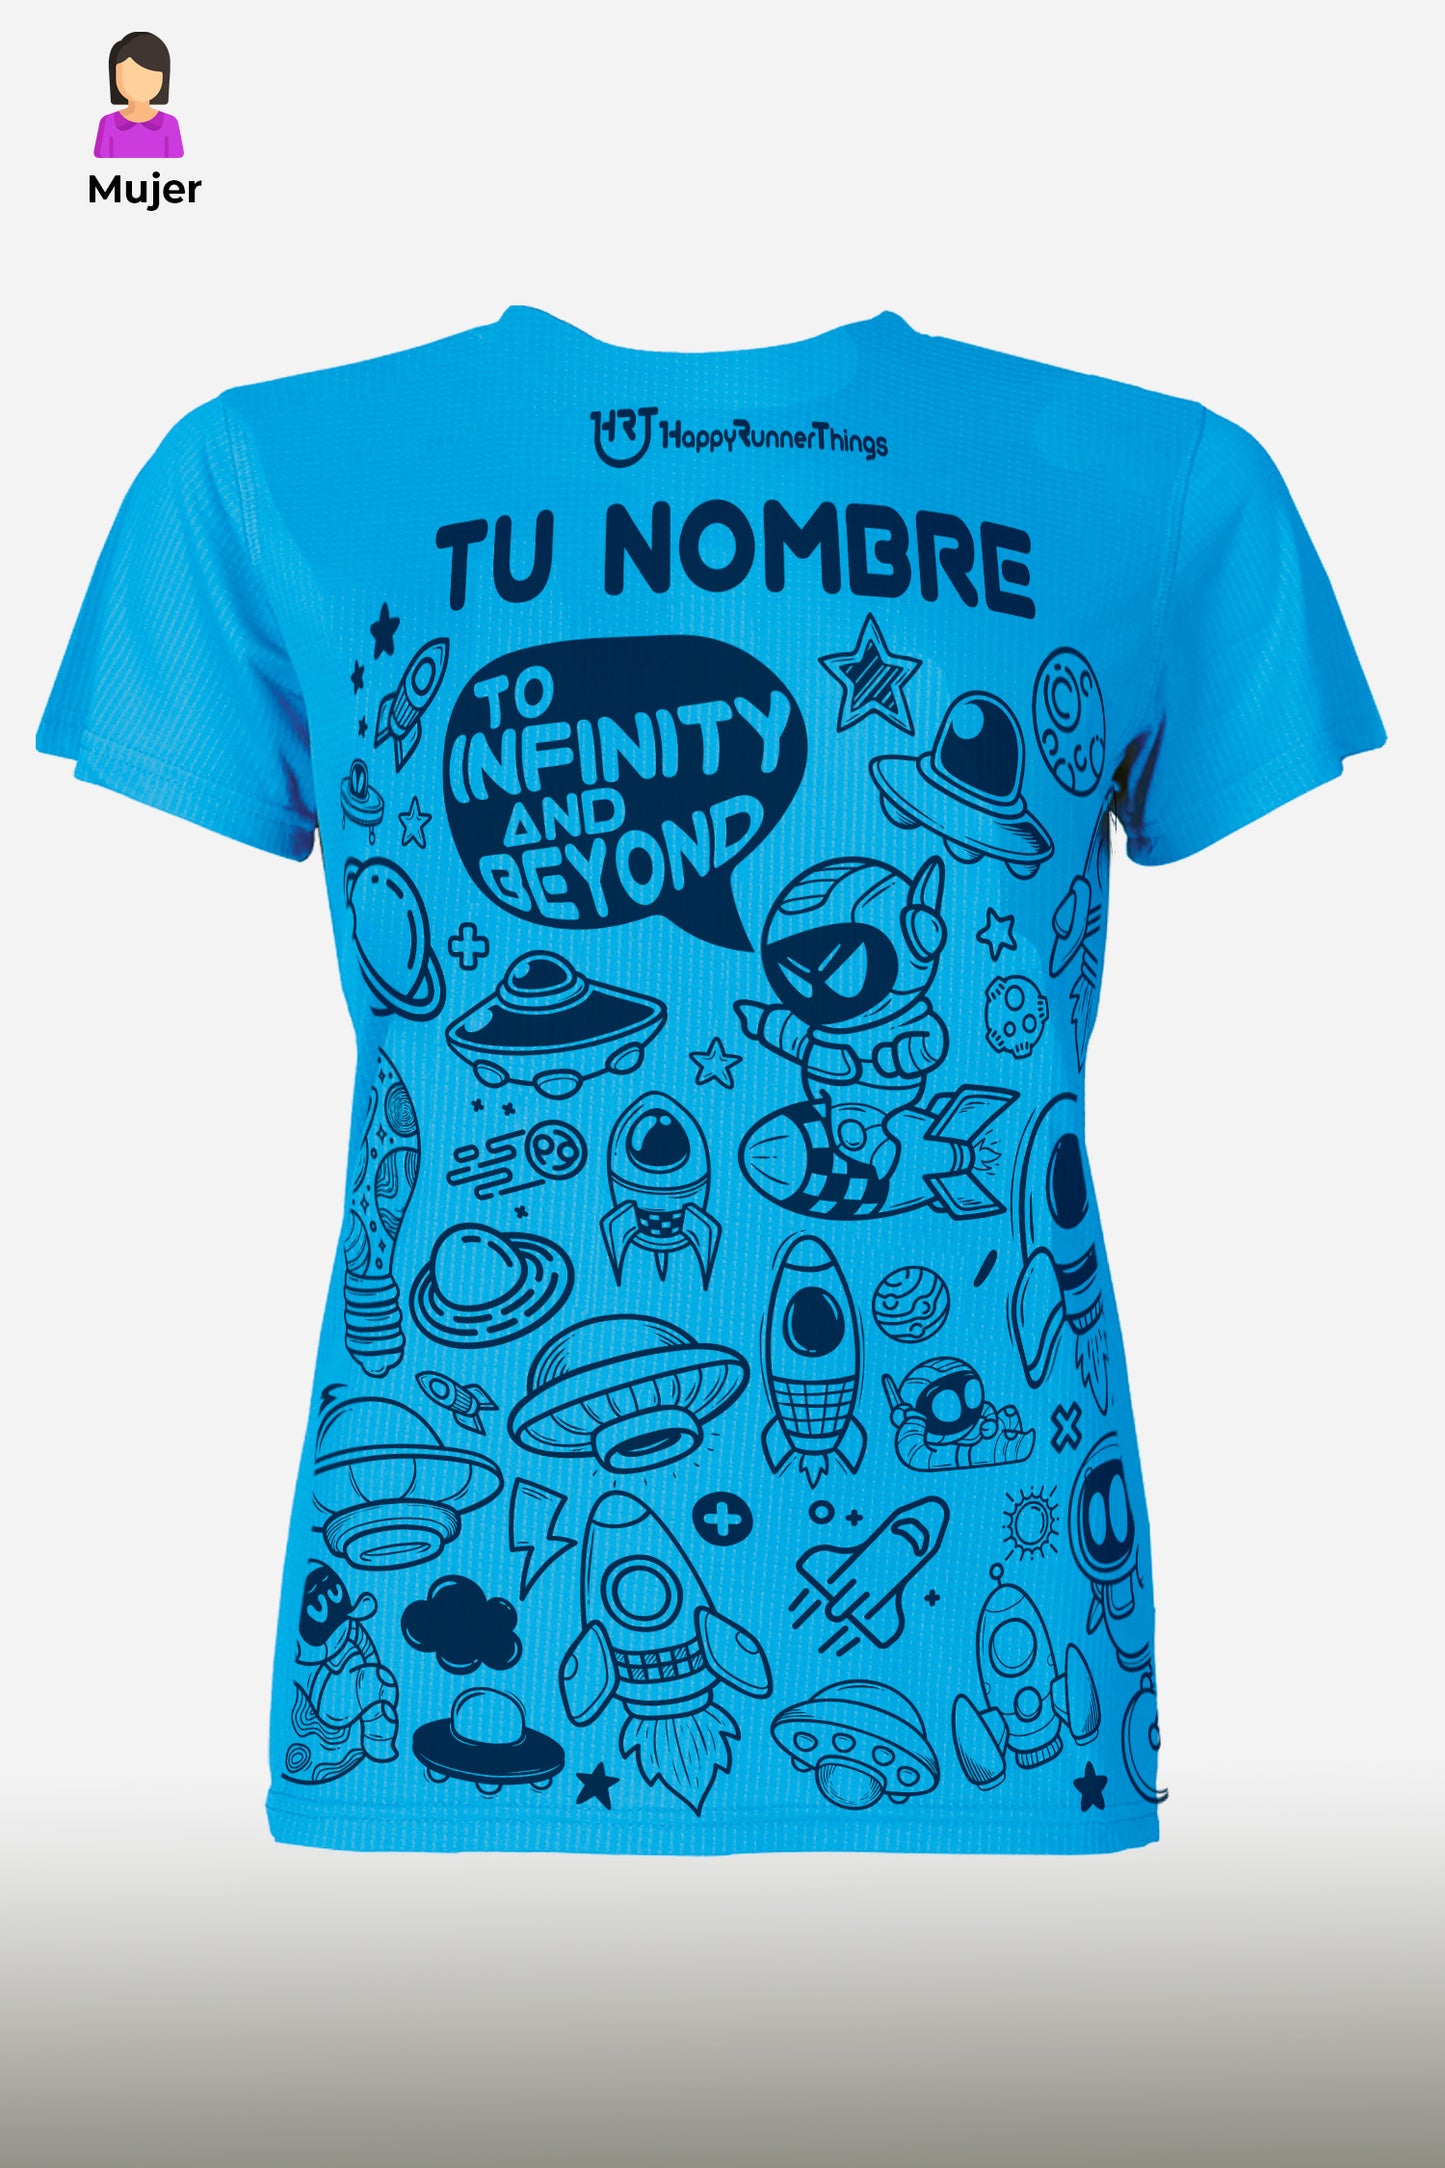 Need More Space - Camiseta Técnica Mujer